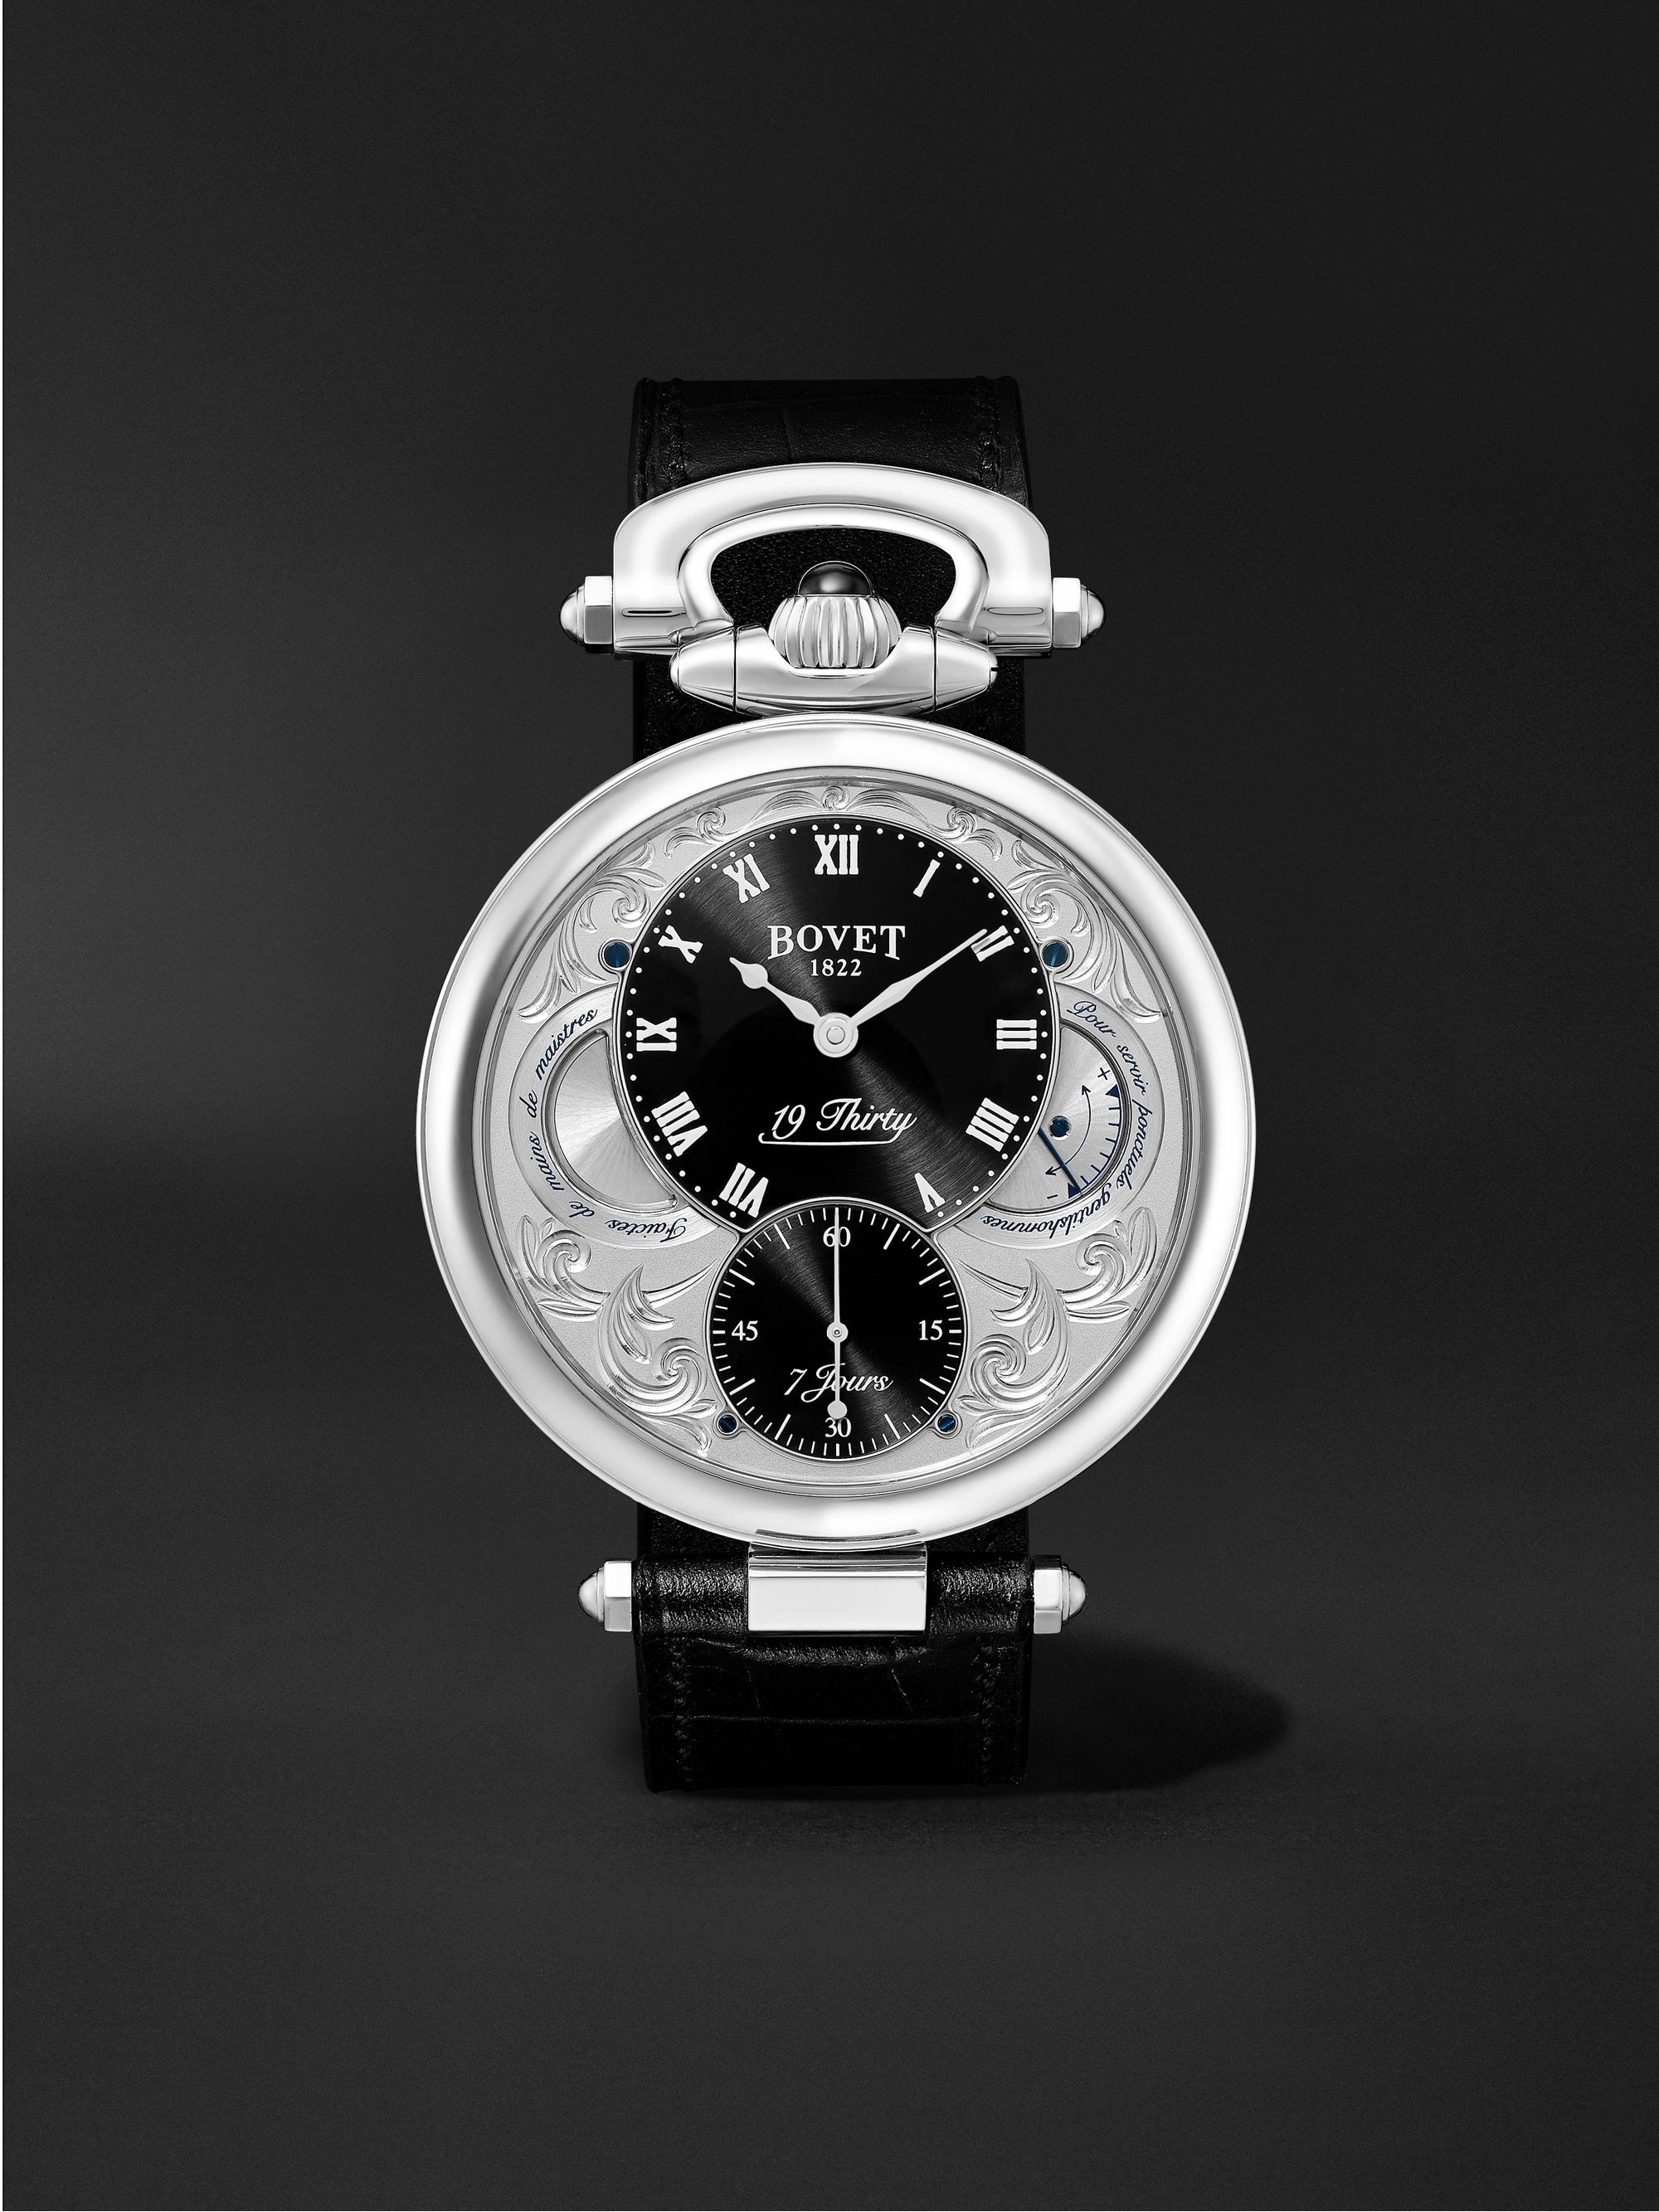 BOVET 19Thirty Fleurier Hand-Wound 42mm Stainless Steel and Croc-Effect Leather Watch, Ref. No. NTS0016